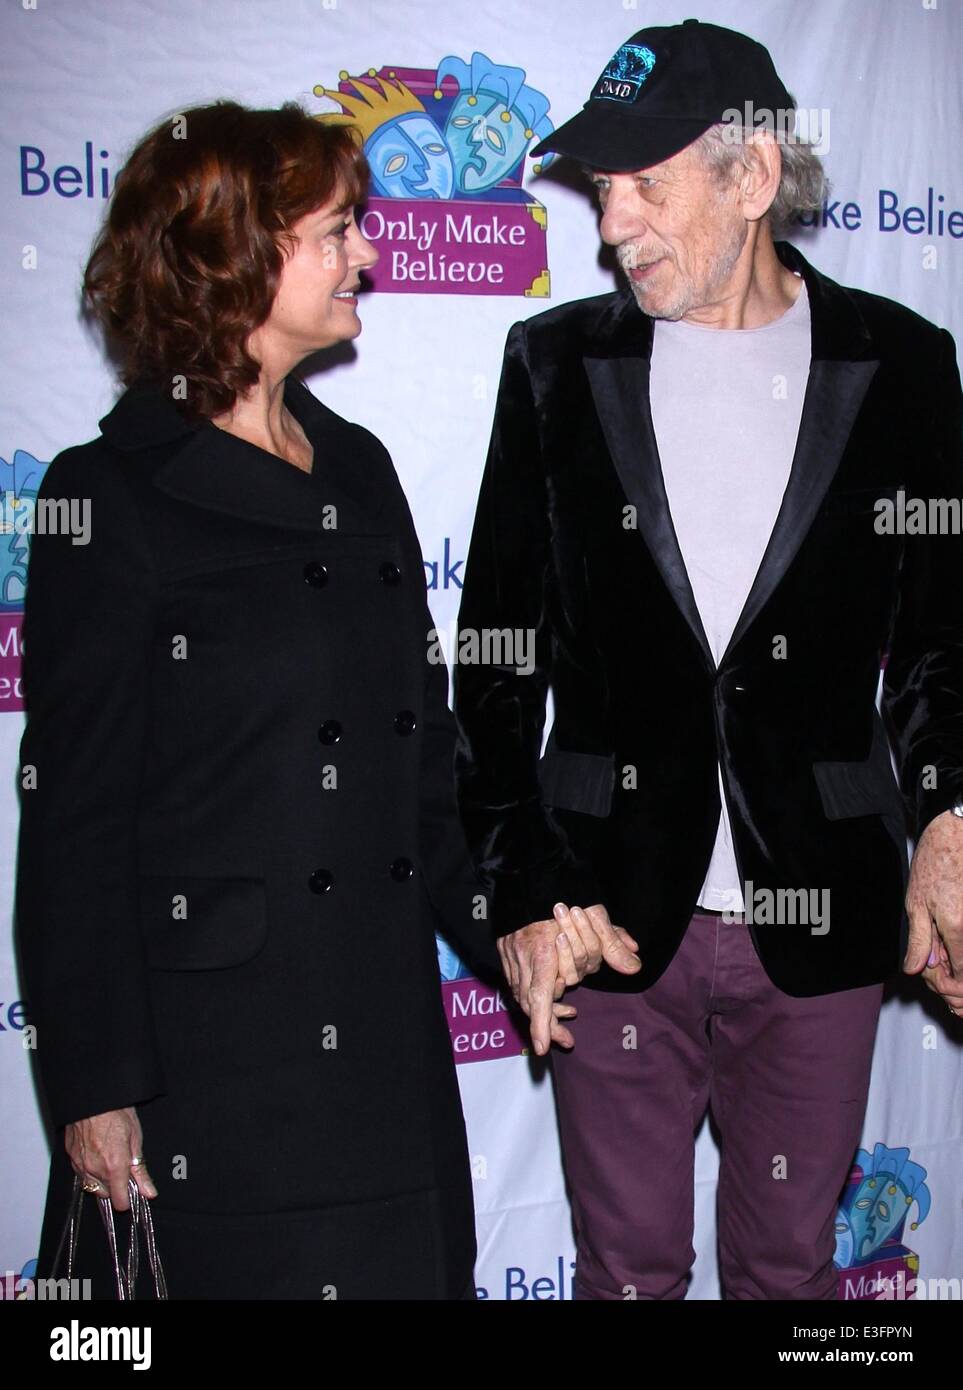 The 14th Annual Only Make Believe Gala, held at the Jacobs Theatre-Arrivals.  Featuring: Susan Sarandon,Ian McKellen Where: New York, NY, United States When: 05 Nov 2013 Stock Photo